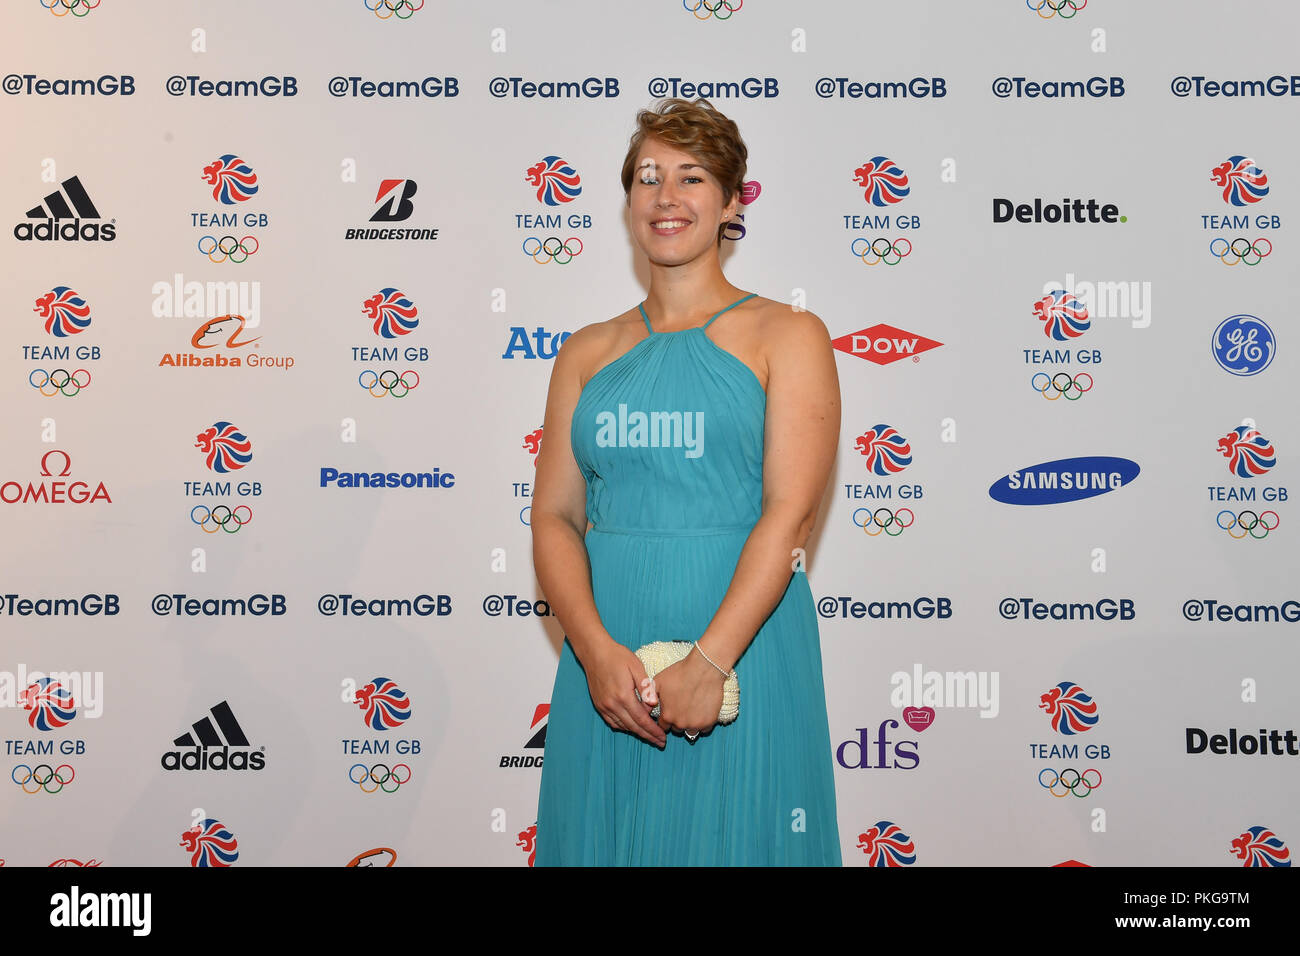 London, UK. 13th September 2018. Lizzy Yarnold attends the Team GB Ball 2018 - Red Carpet Arrivals on Thursday, September 13, 2018, at the Royal Horticultural Halls, LONDON ENGLAND. Credit: Taka Wu/Alamy Live News Stock Photo